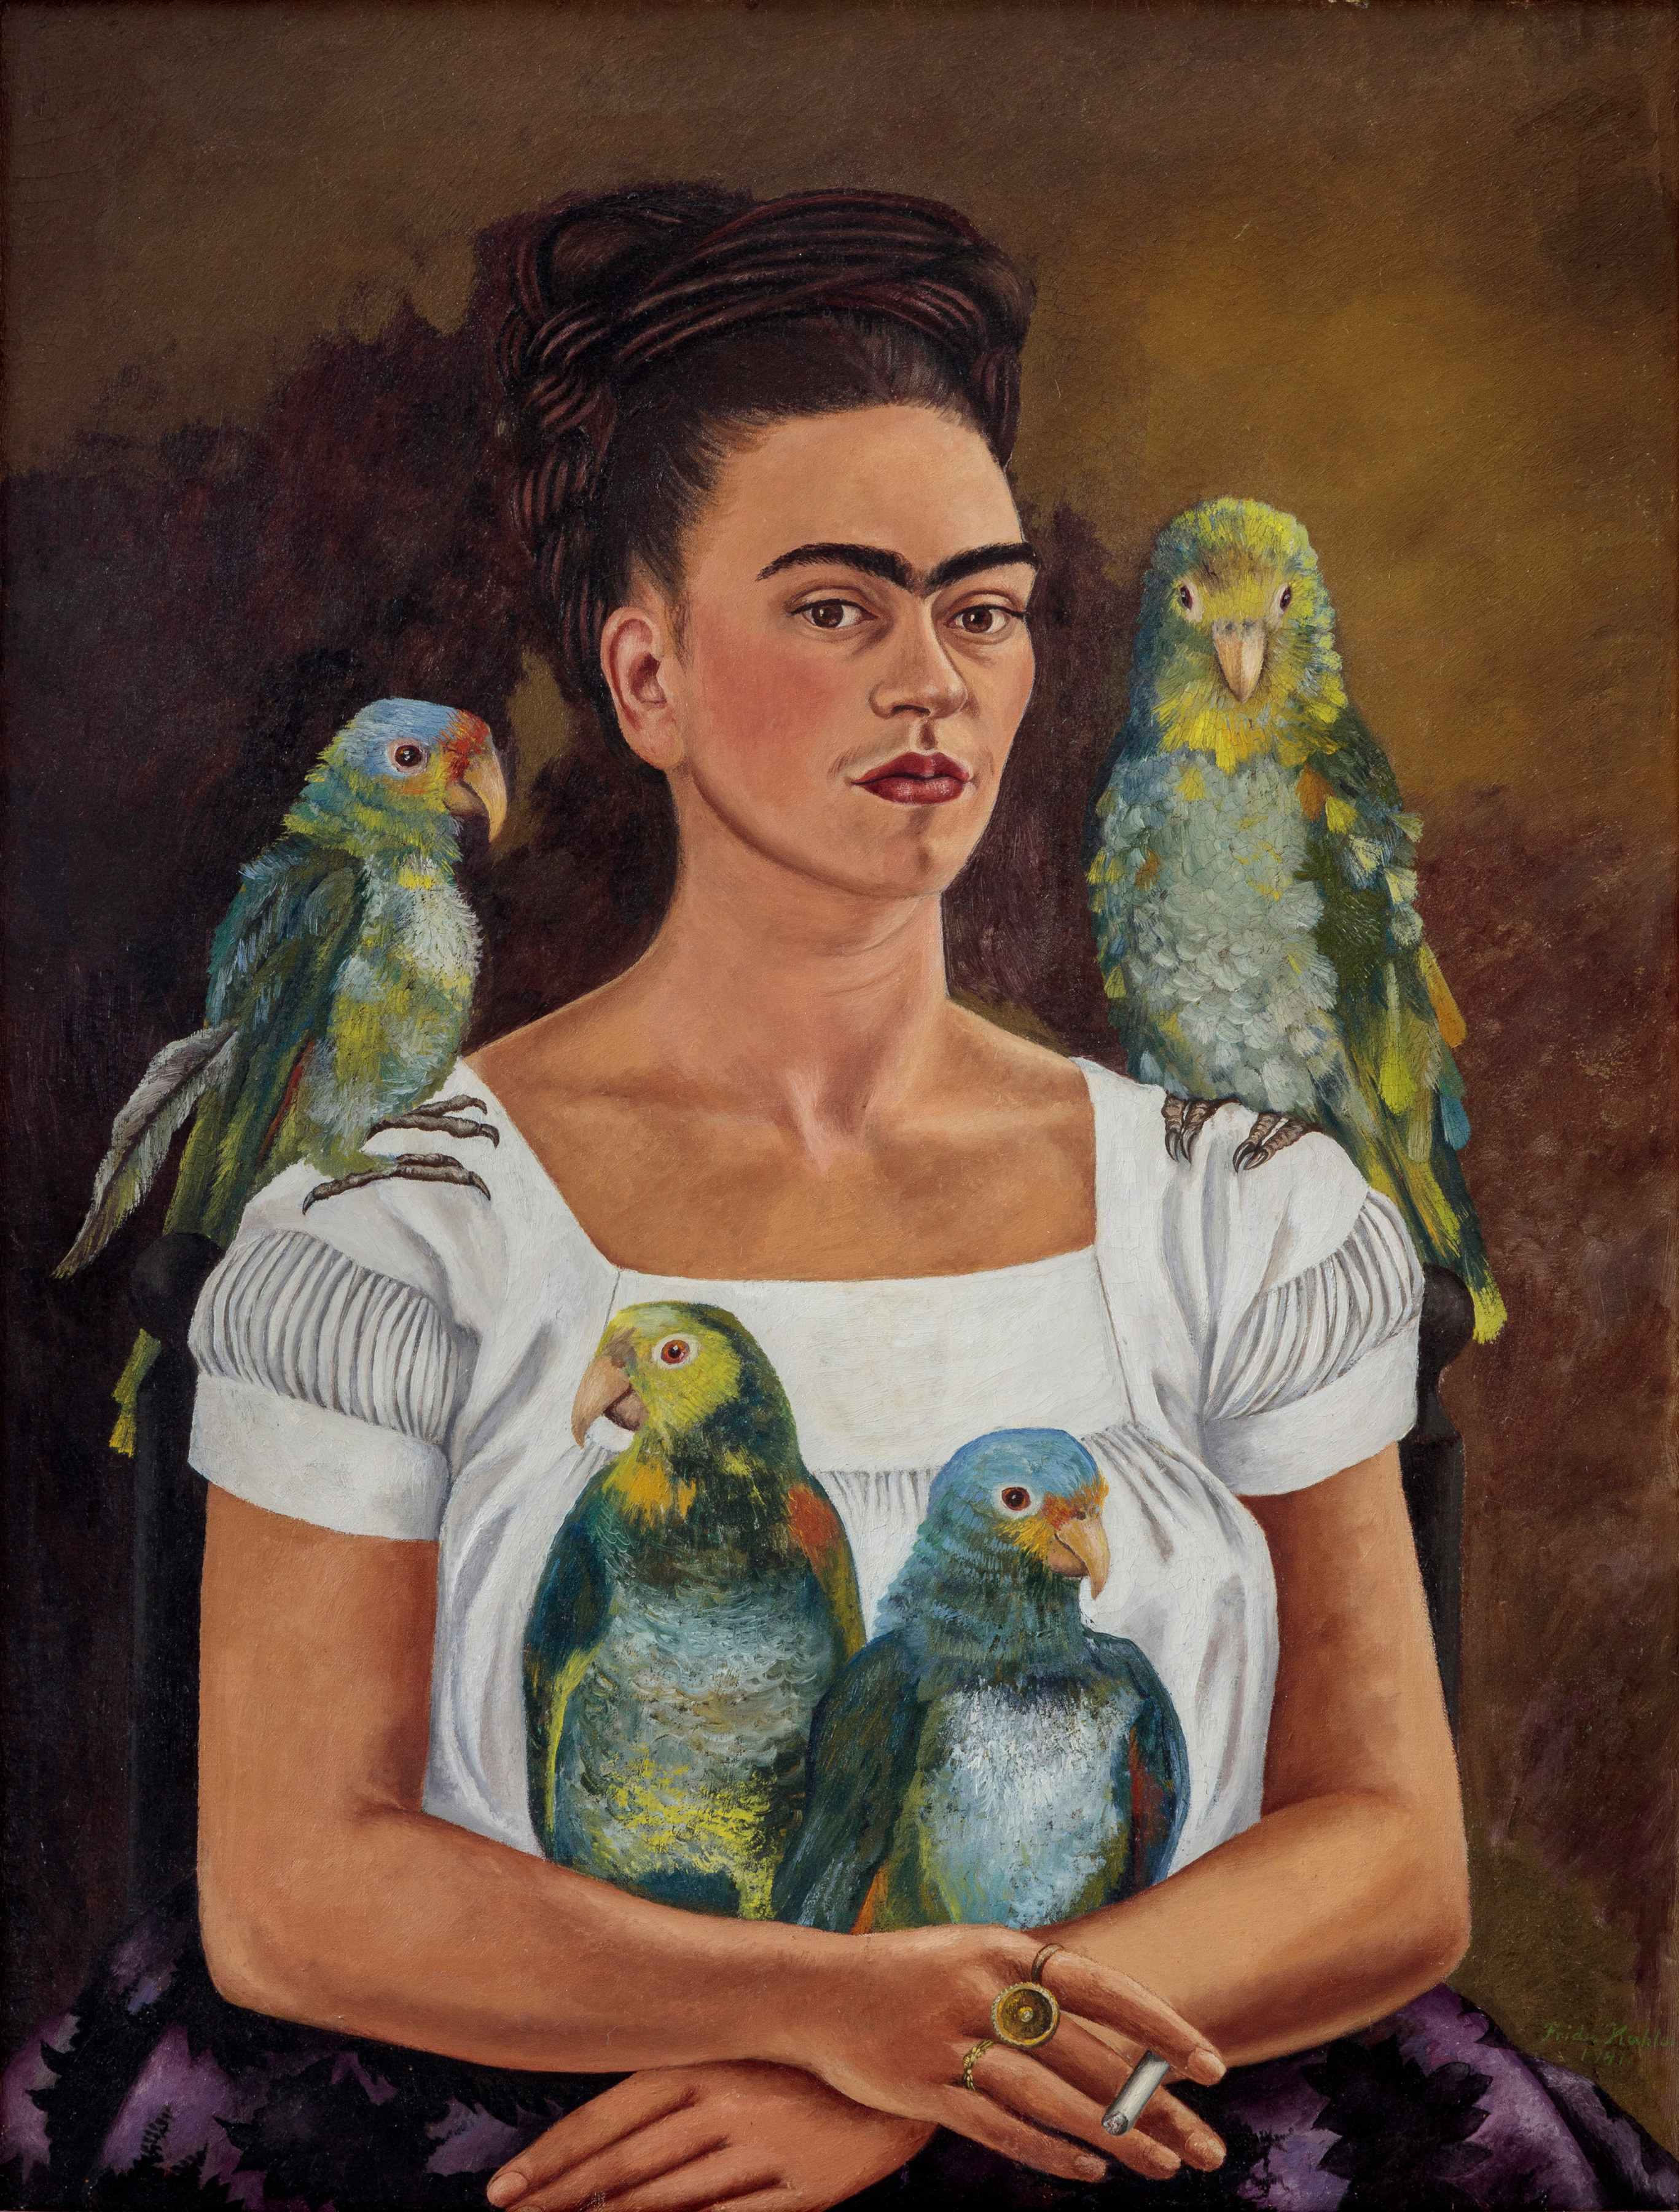 Frida Kahlo. Me and My Parrots. 1941. Oil on canvas, 82 by 62.8 cm (32&frac14; by 24&frac34; in.). Private Collection &copy; 2019 Banco de M&eacute;xico Diego Rivera Frida Kahlo Museums Trust, Mexico, D.F. / Artists Rights Society (ARS), New York